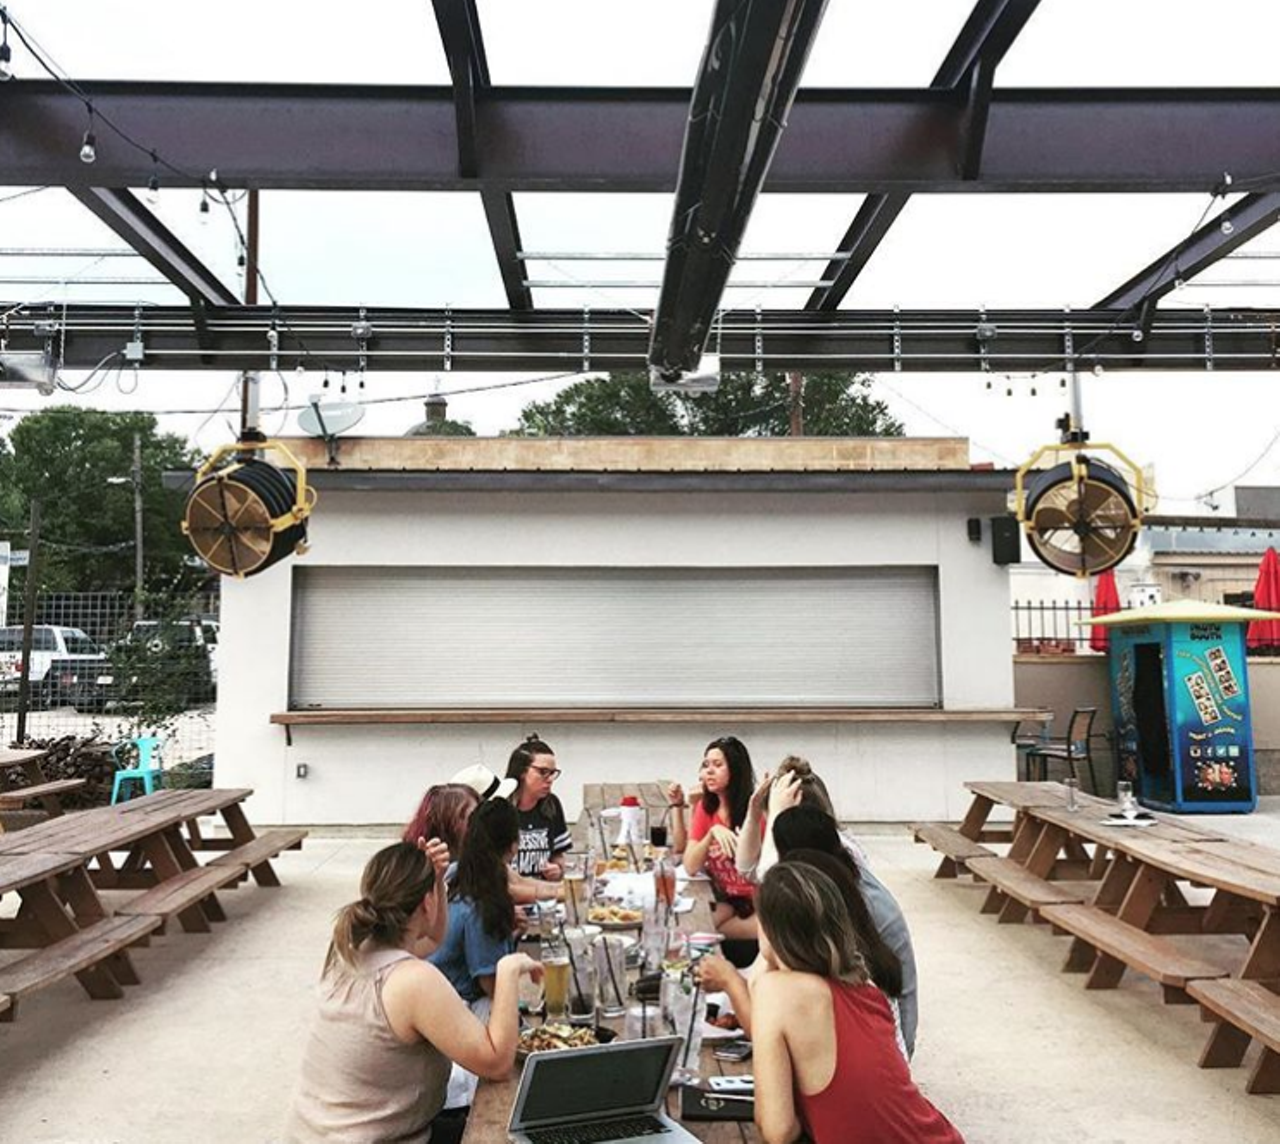 AquaBrew
150 S LBJ Dr, San Marcos, (512) 353-2739, aqua-brew.com
Doubling as a brewery and live music venue, AquaBrew is a prime spot for the next time you and your crew are rolling through San Marcos.
Photo via Instagram / risingtidesmtx